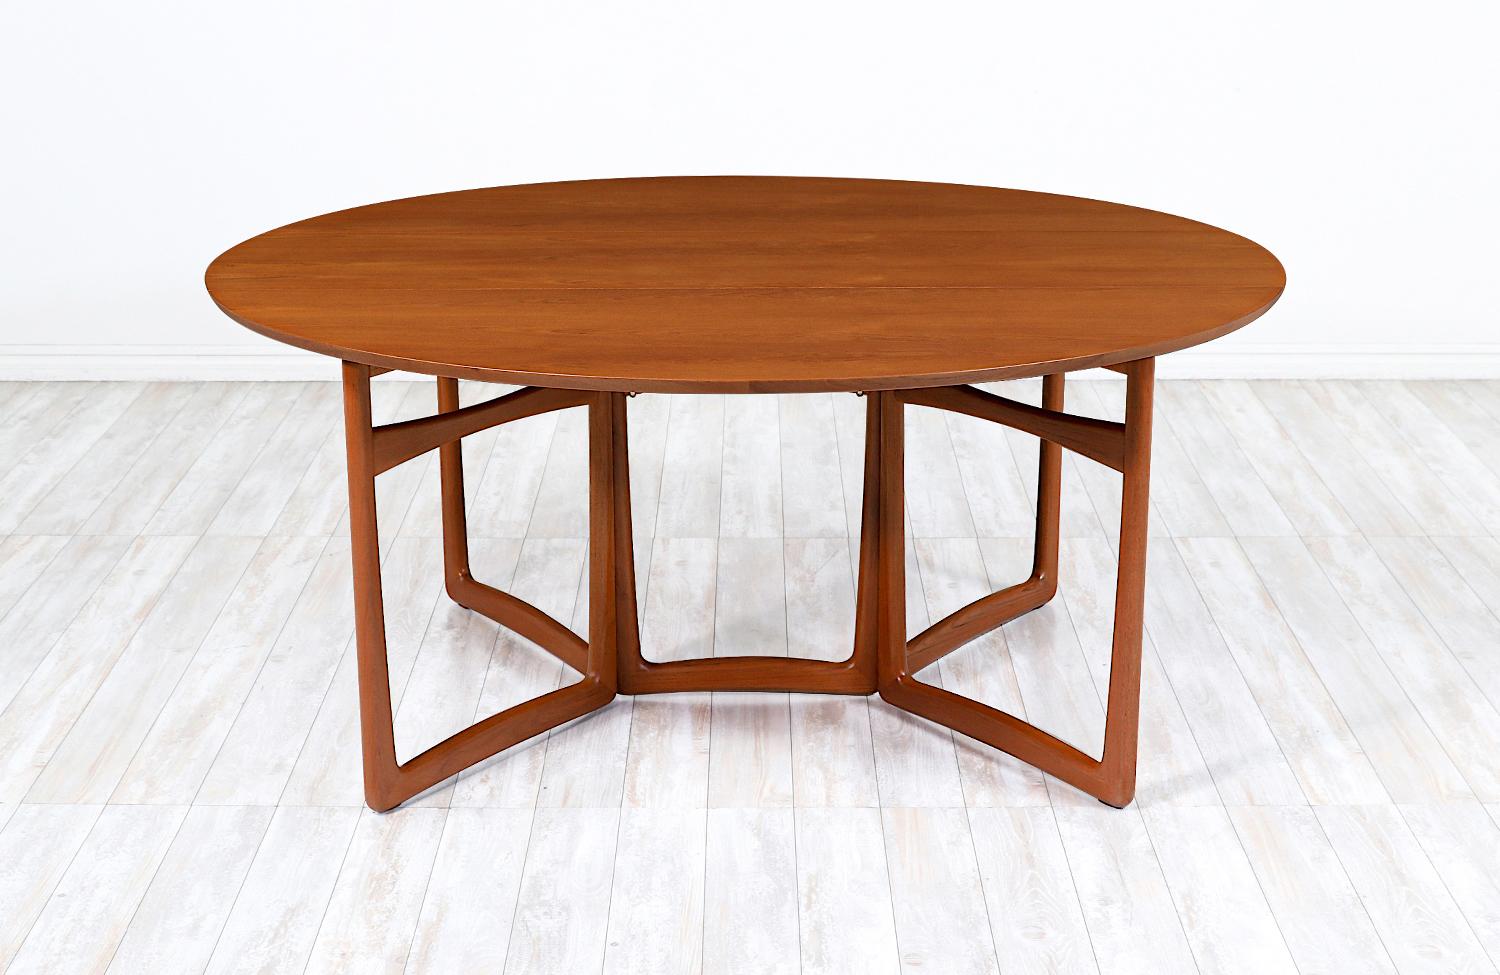 Stunning modern dining table by the iconic Danish duo, Peter Hvidt and Orla Mølgaard Nielsen for France & Søn in Denmark circa 1950s. Quintessentially Danish, this dining table features a solid teak base with a sophisticated design, making it